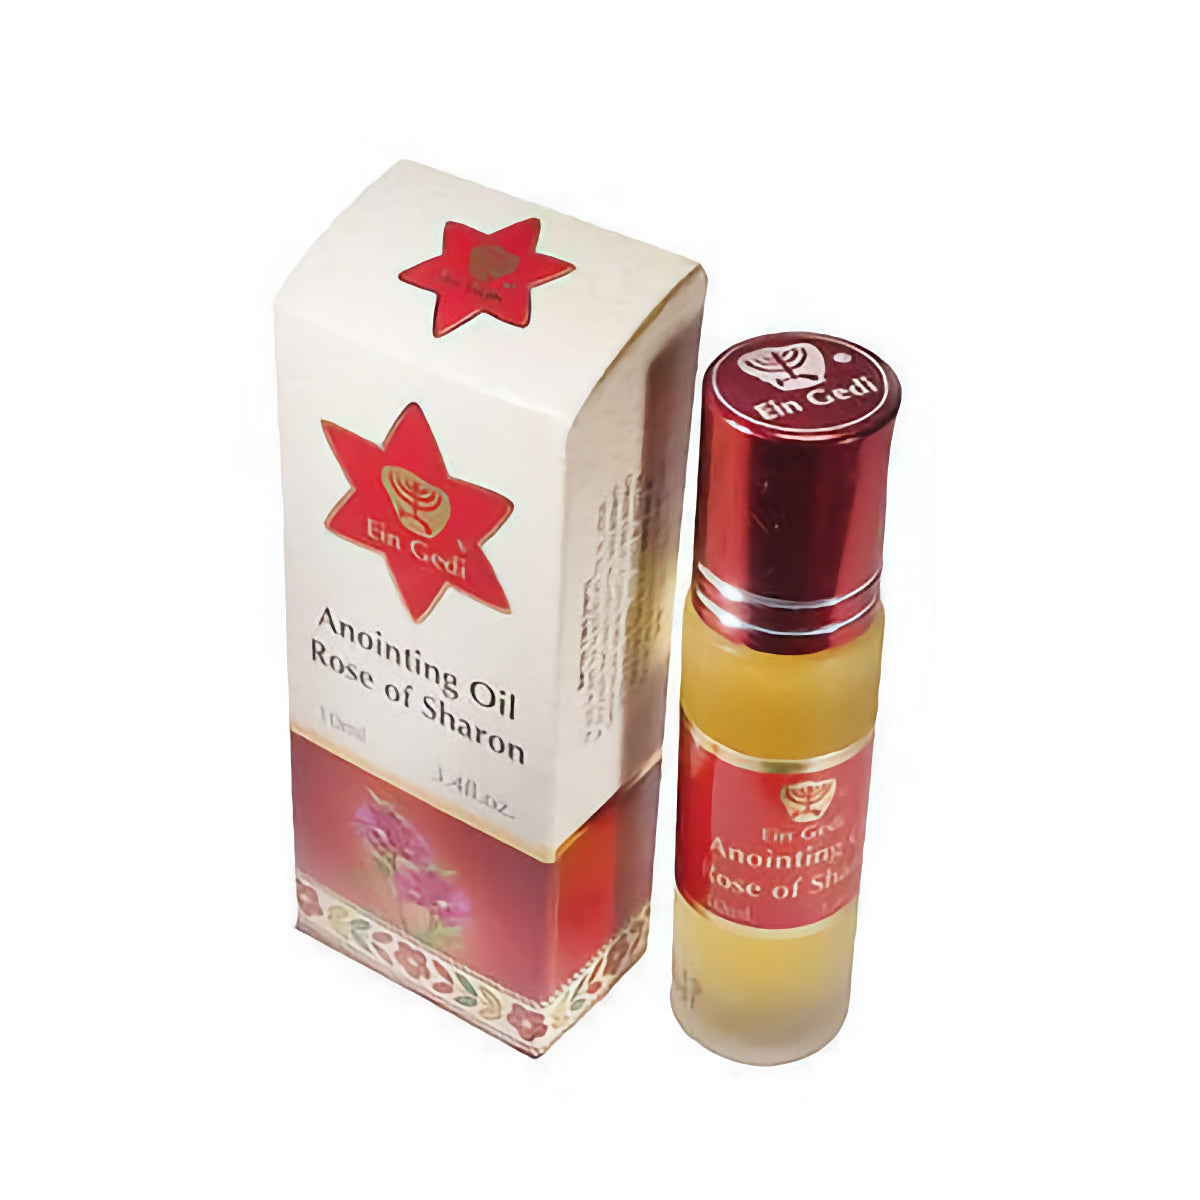 Roll On Anointing Oil Rose Of Sharon 10 ml. - 3.4 fl. oz. From Holyland Jerusalem